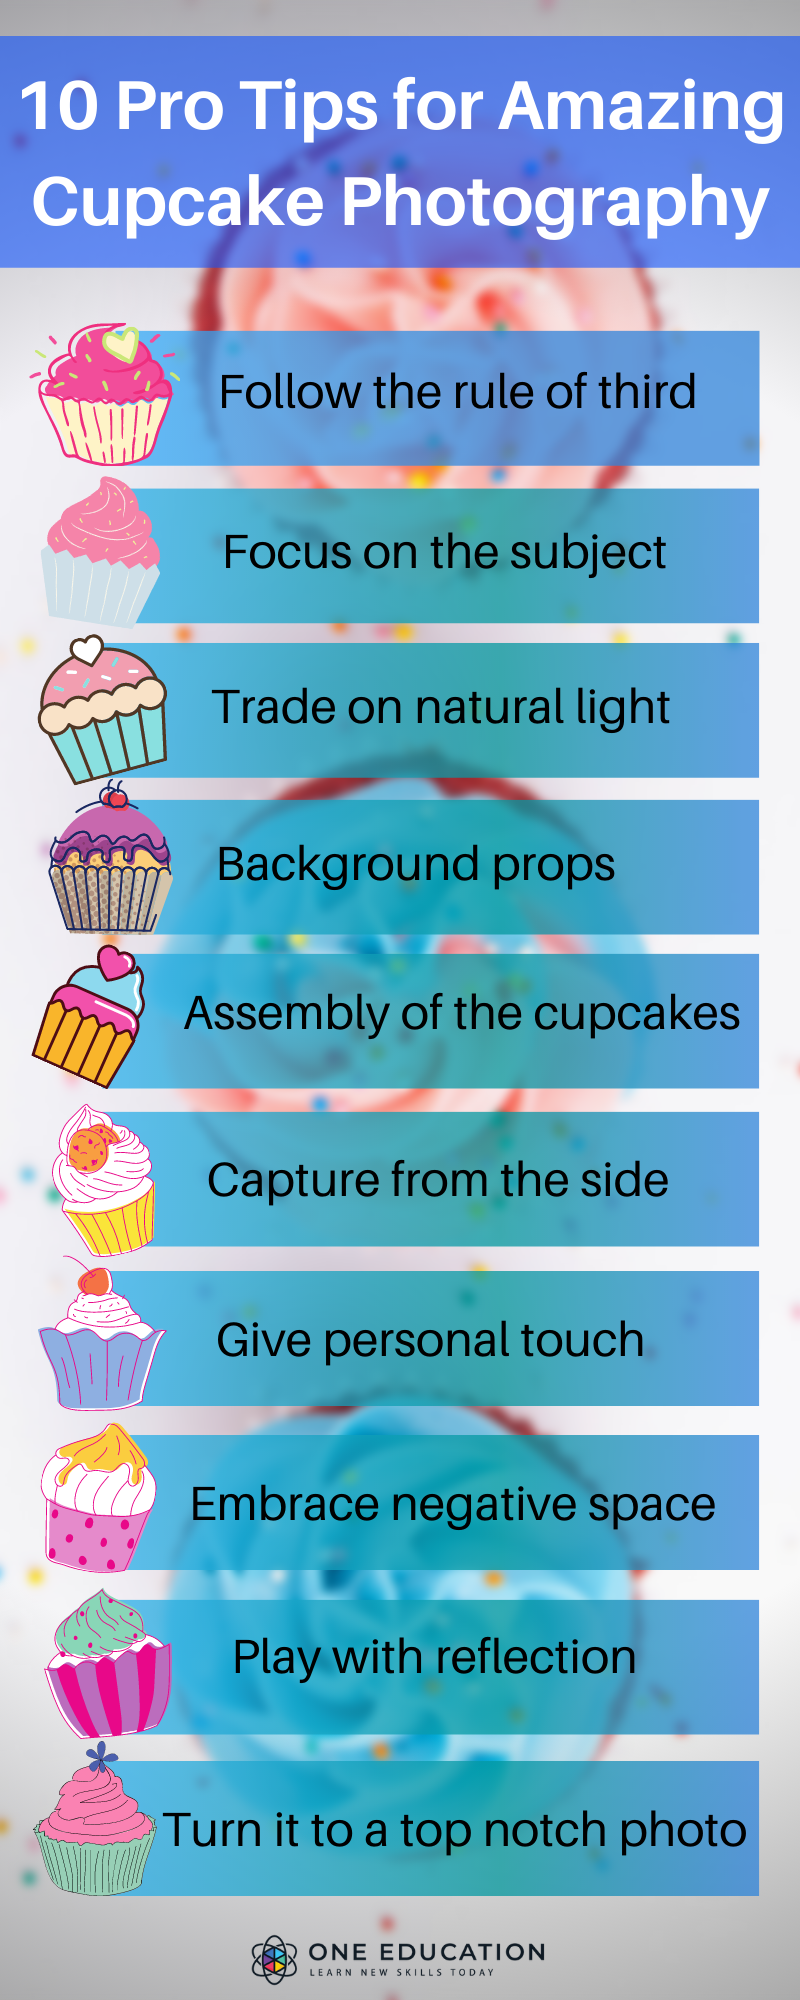 Info-graphic on 10 tips for taking cupcake photography